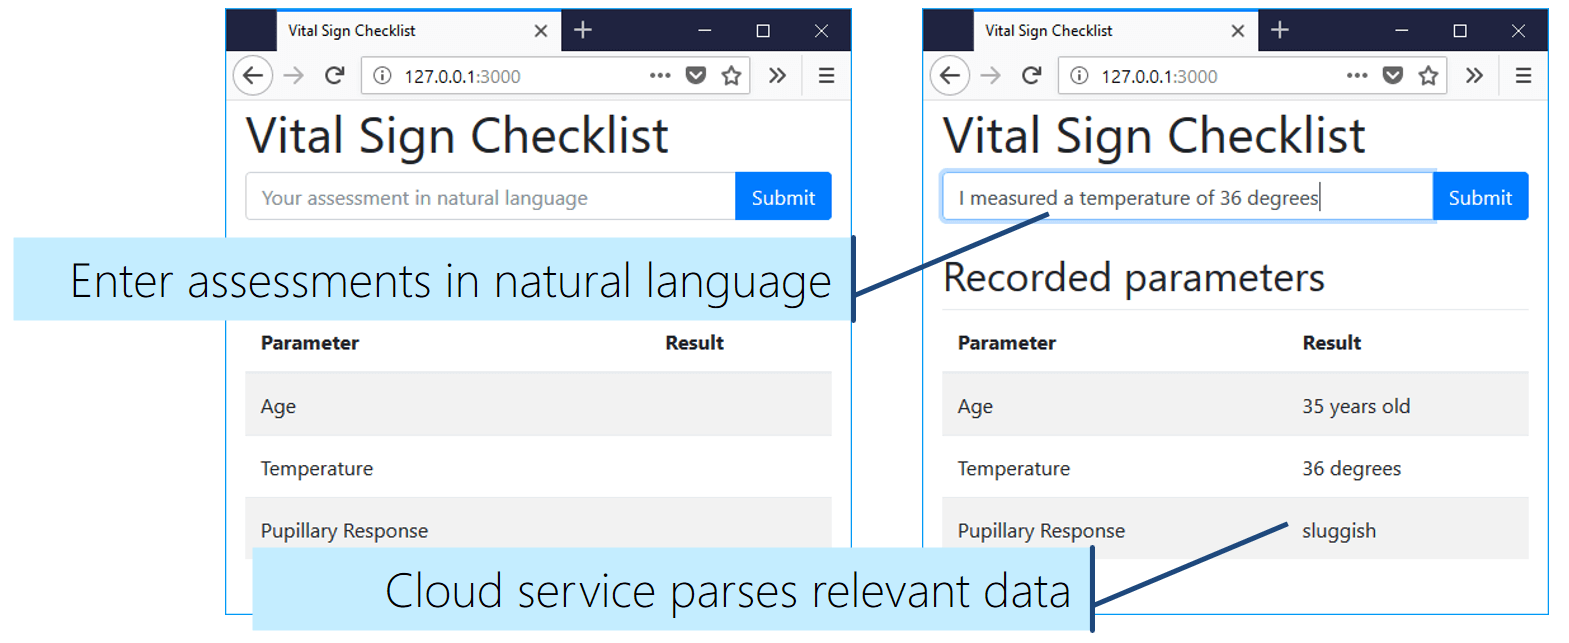 The final vital sign checklist app with natural language understanding